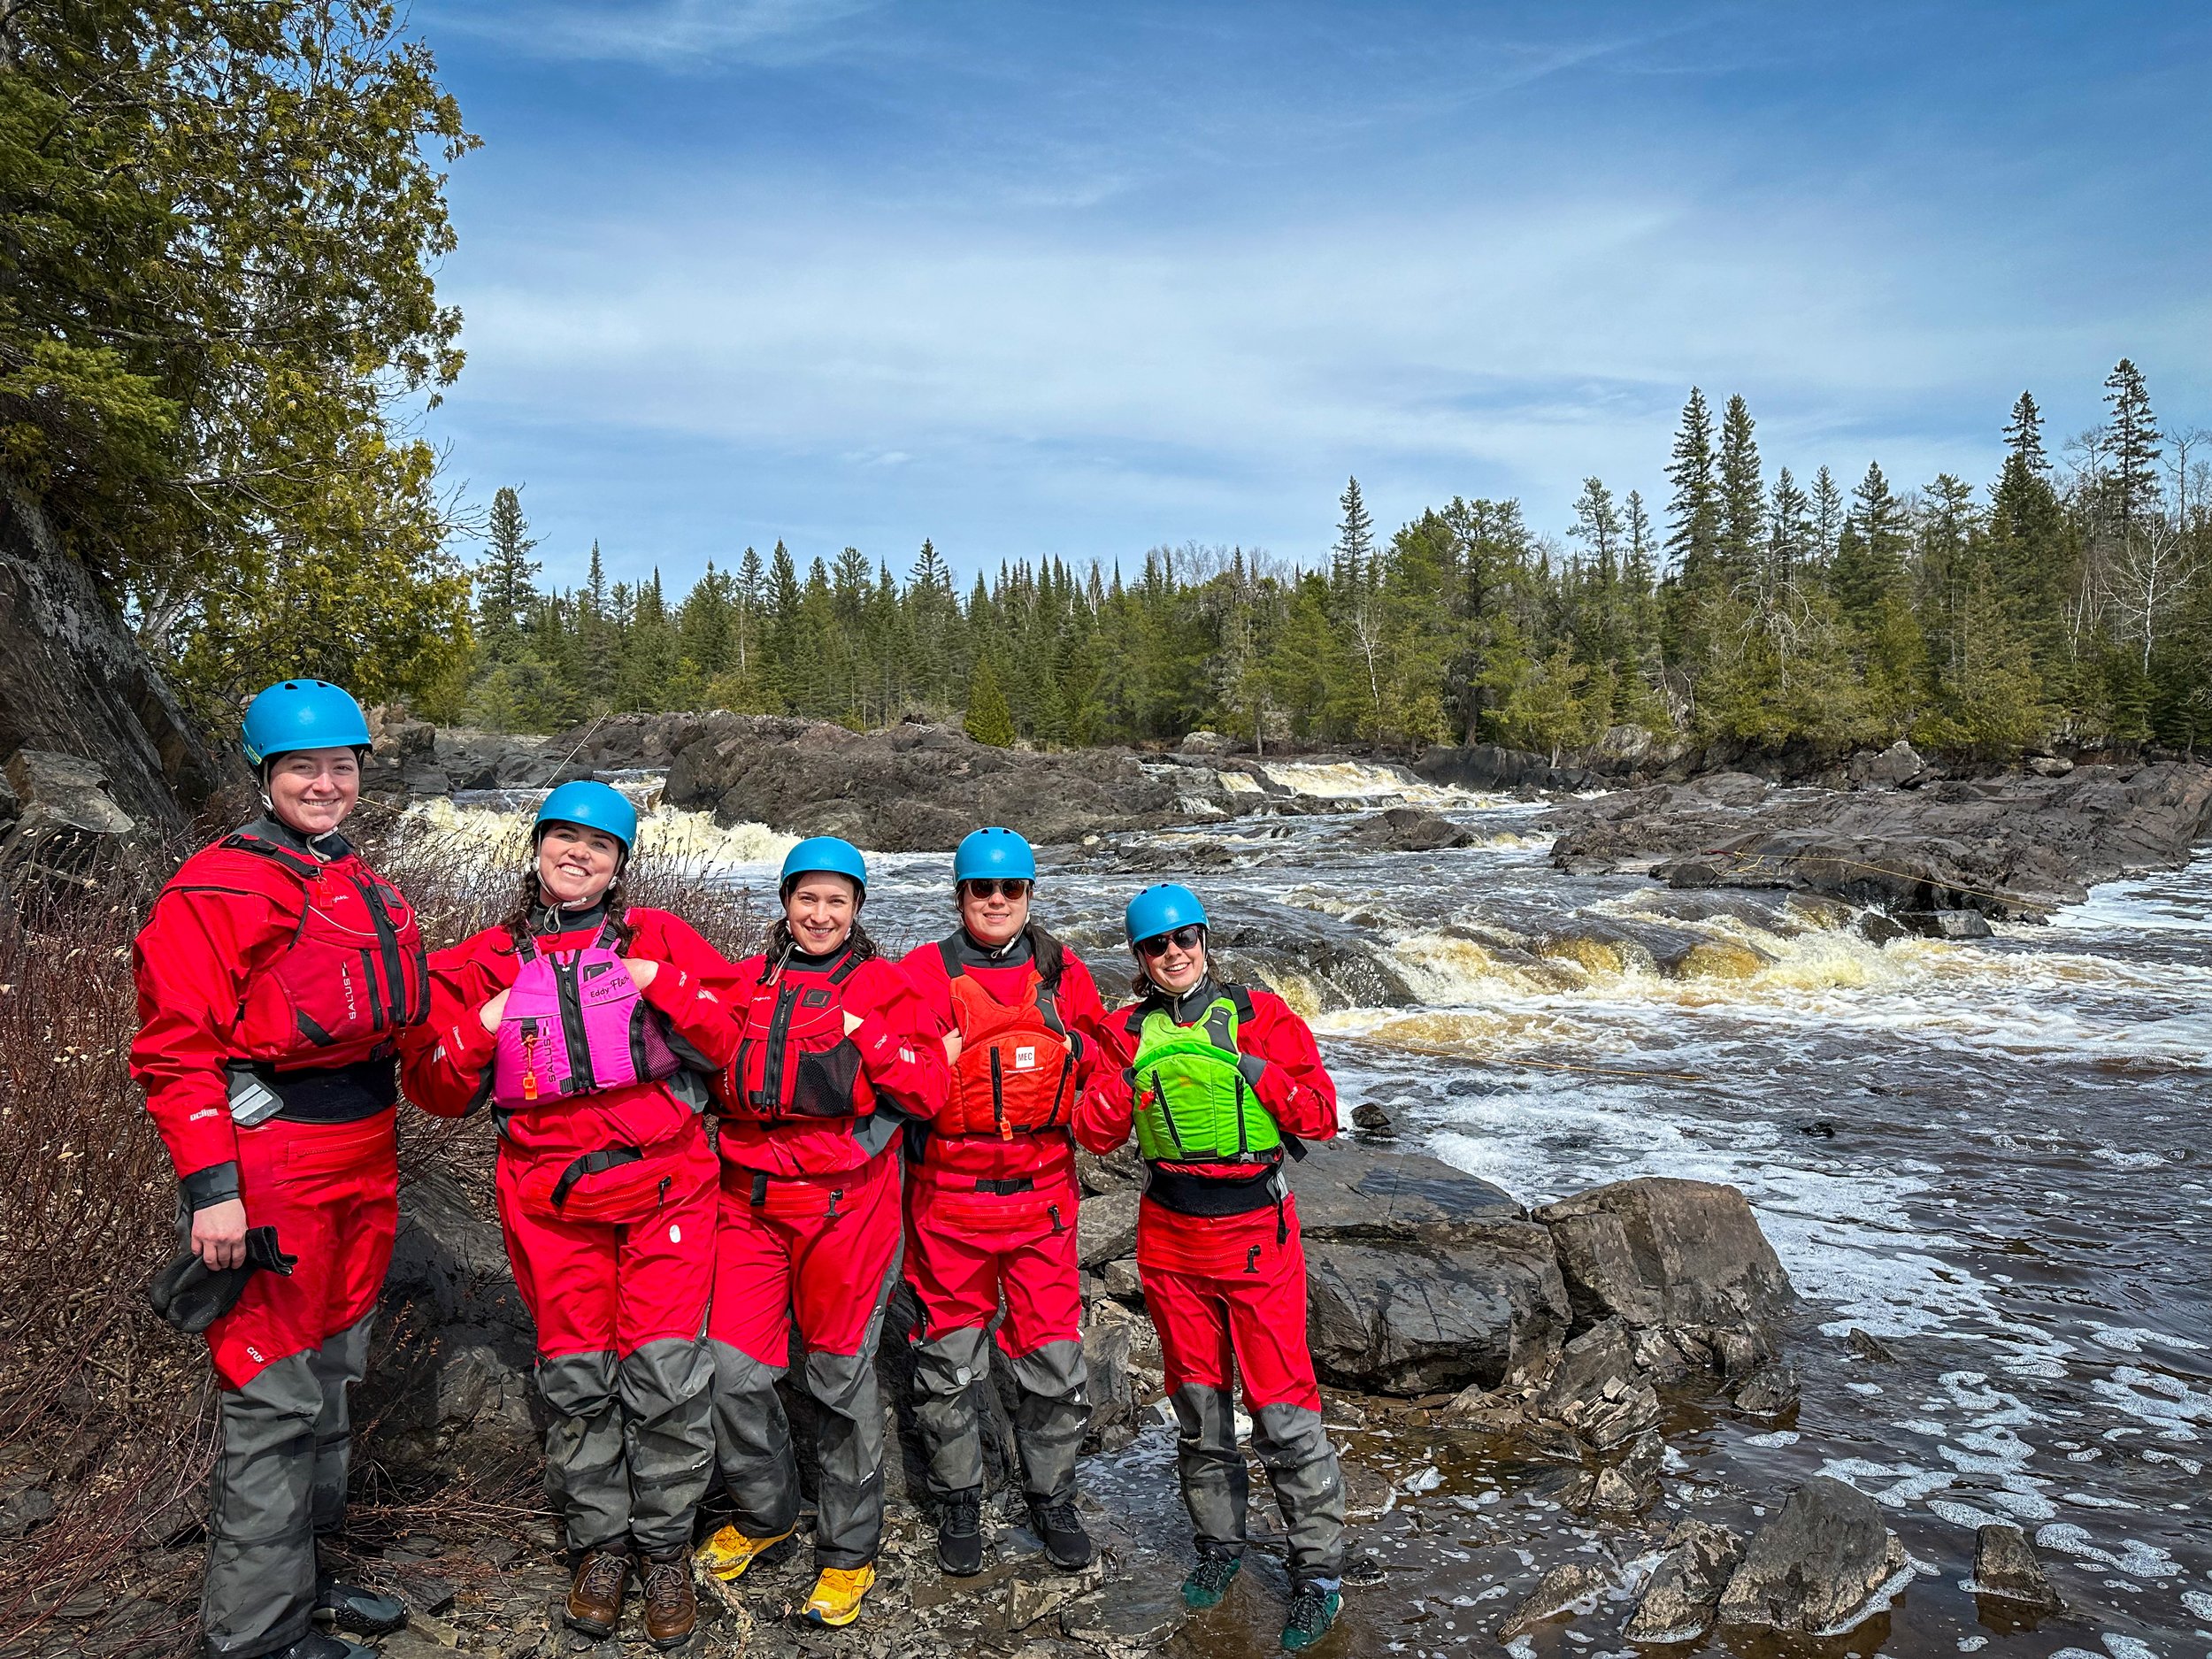 From left to right: Allison McKenzie, Claire Farrell, Haley MacLeod, Kelsie Iserhoff, and Connie O'Connor at the swiftwater rescue training